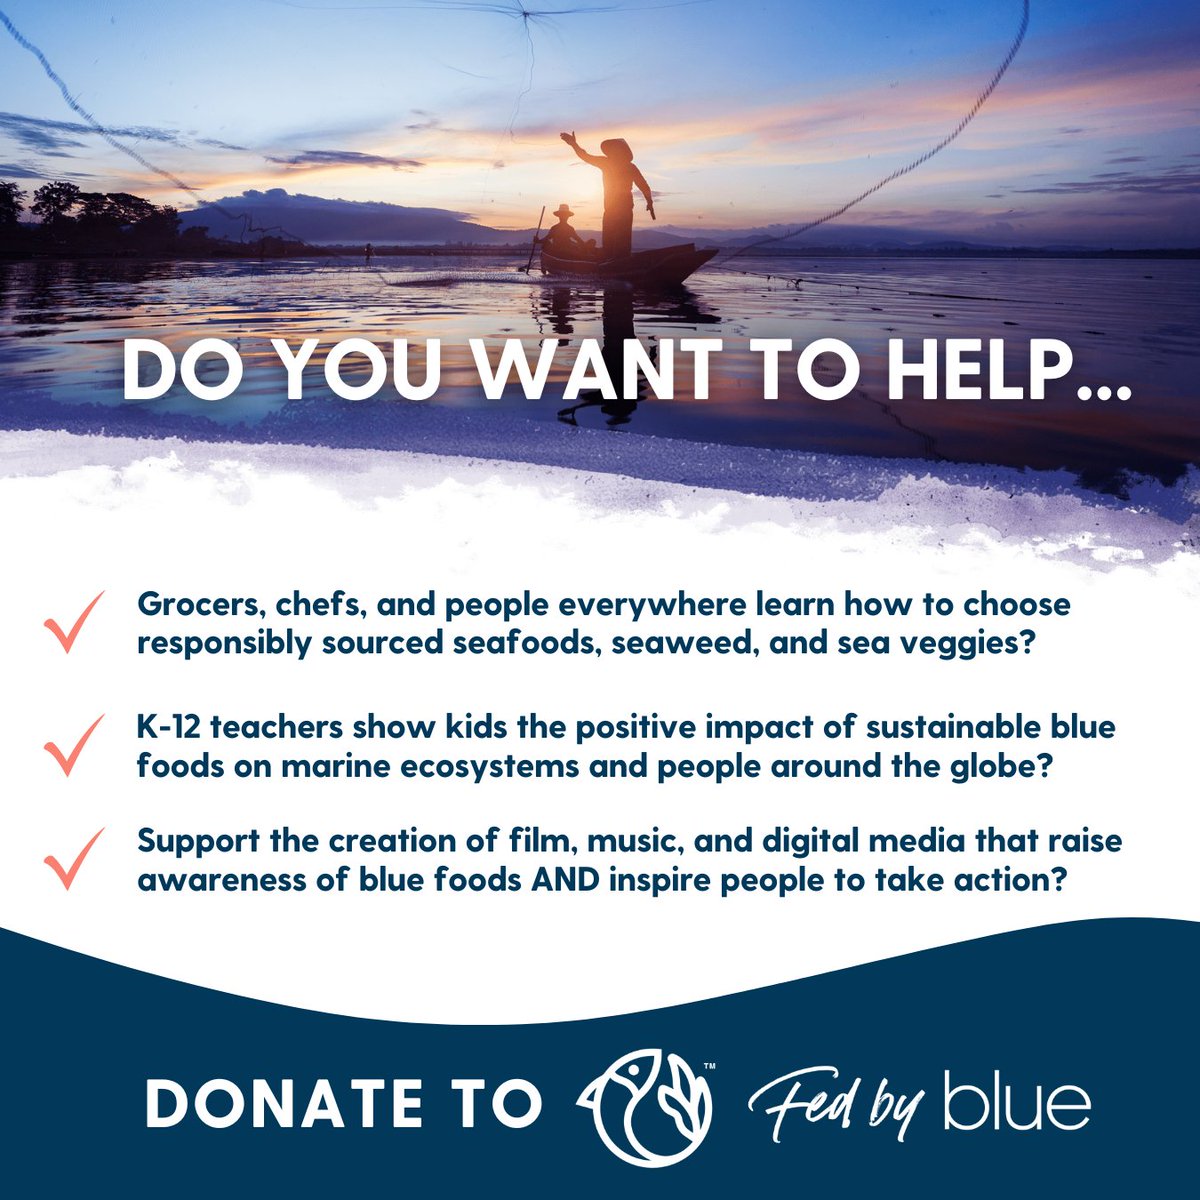 As a science-led education campaign, our team works to inspire ocean lovers, activists, early adopters, foodies, and consumers with the knowledge and materials to help participate in creating a responsible #bluefood system. Join our mission by donating ➡️ bit.ly/4bjBuSs